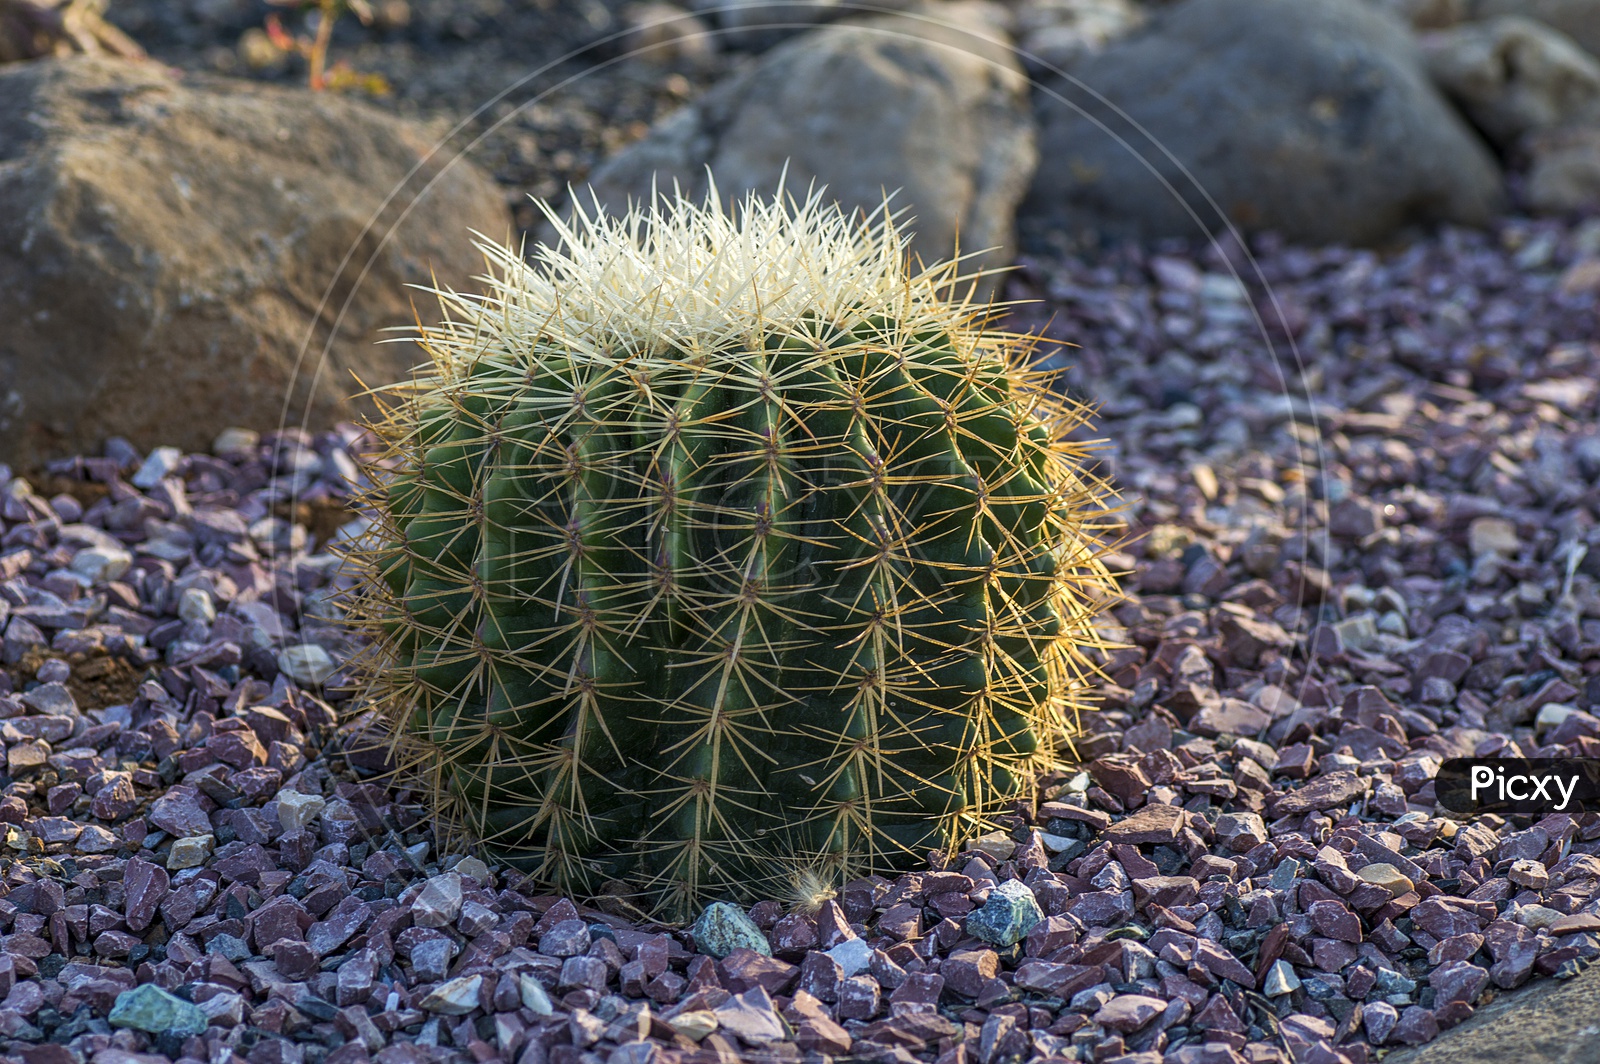 Cactus Plant With Thorns